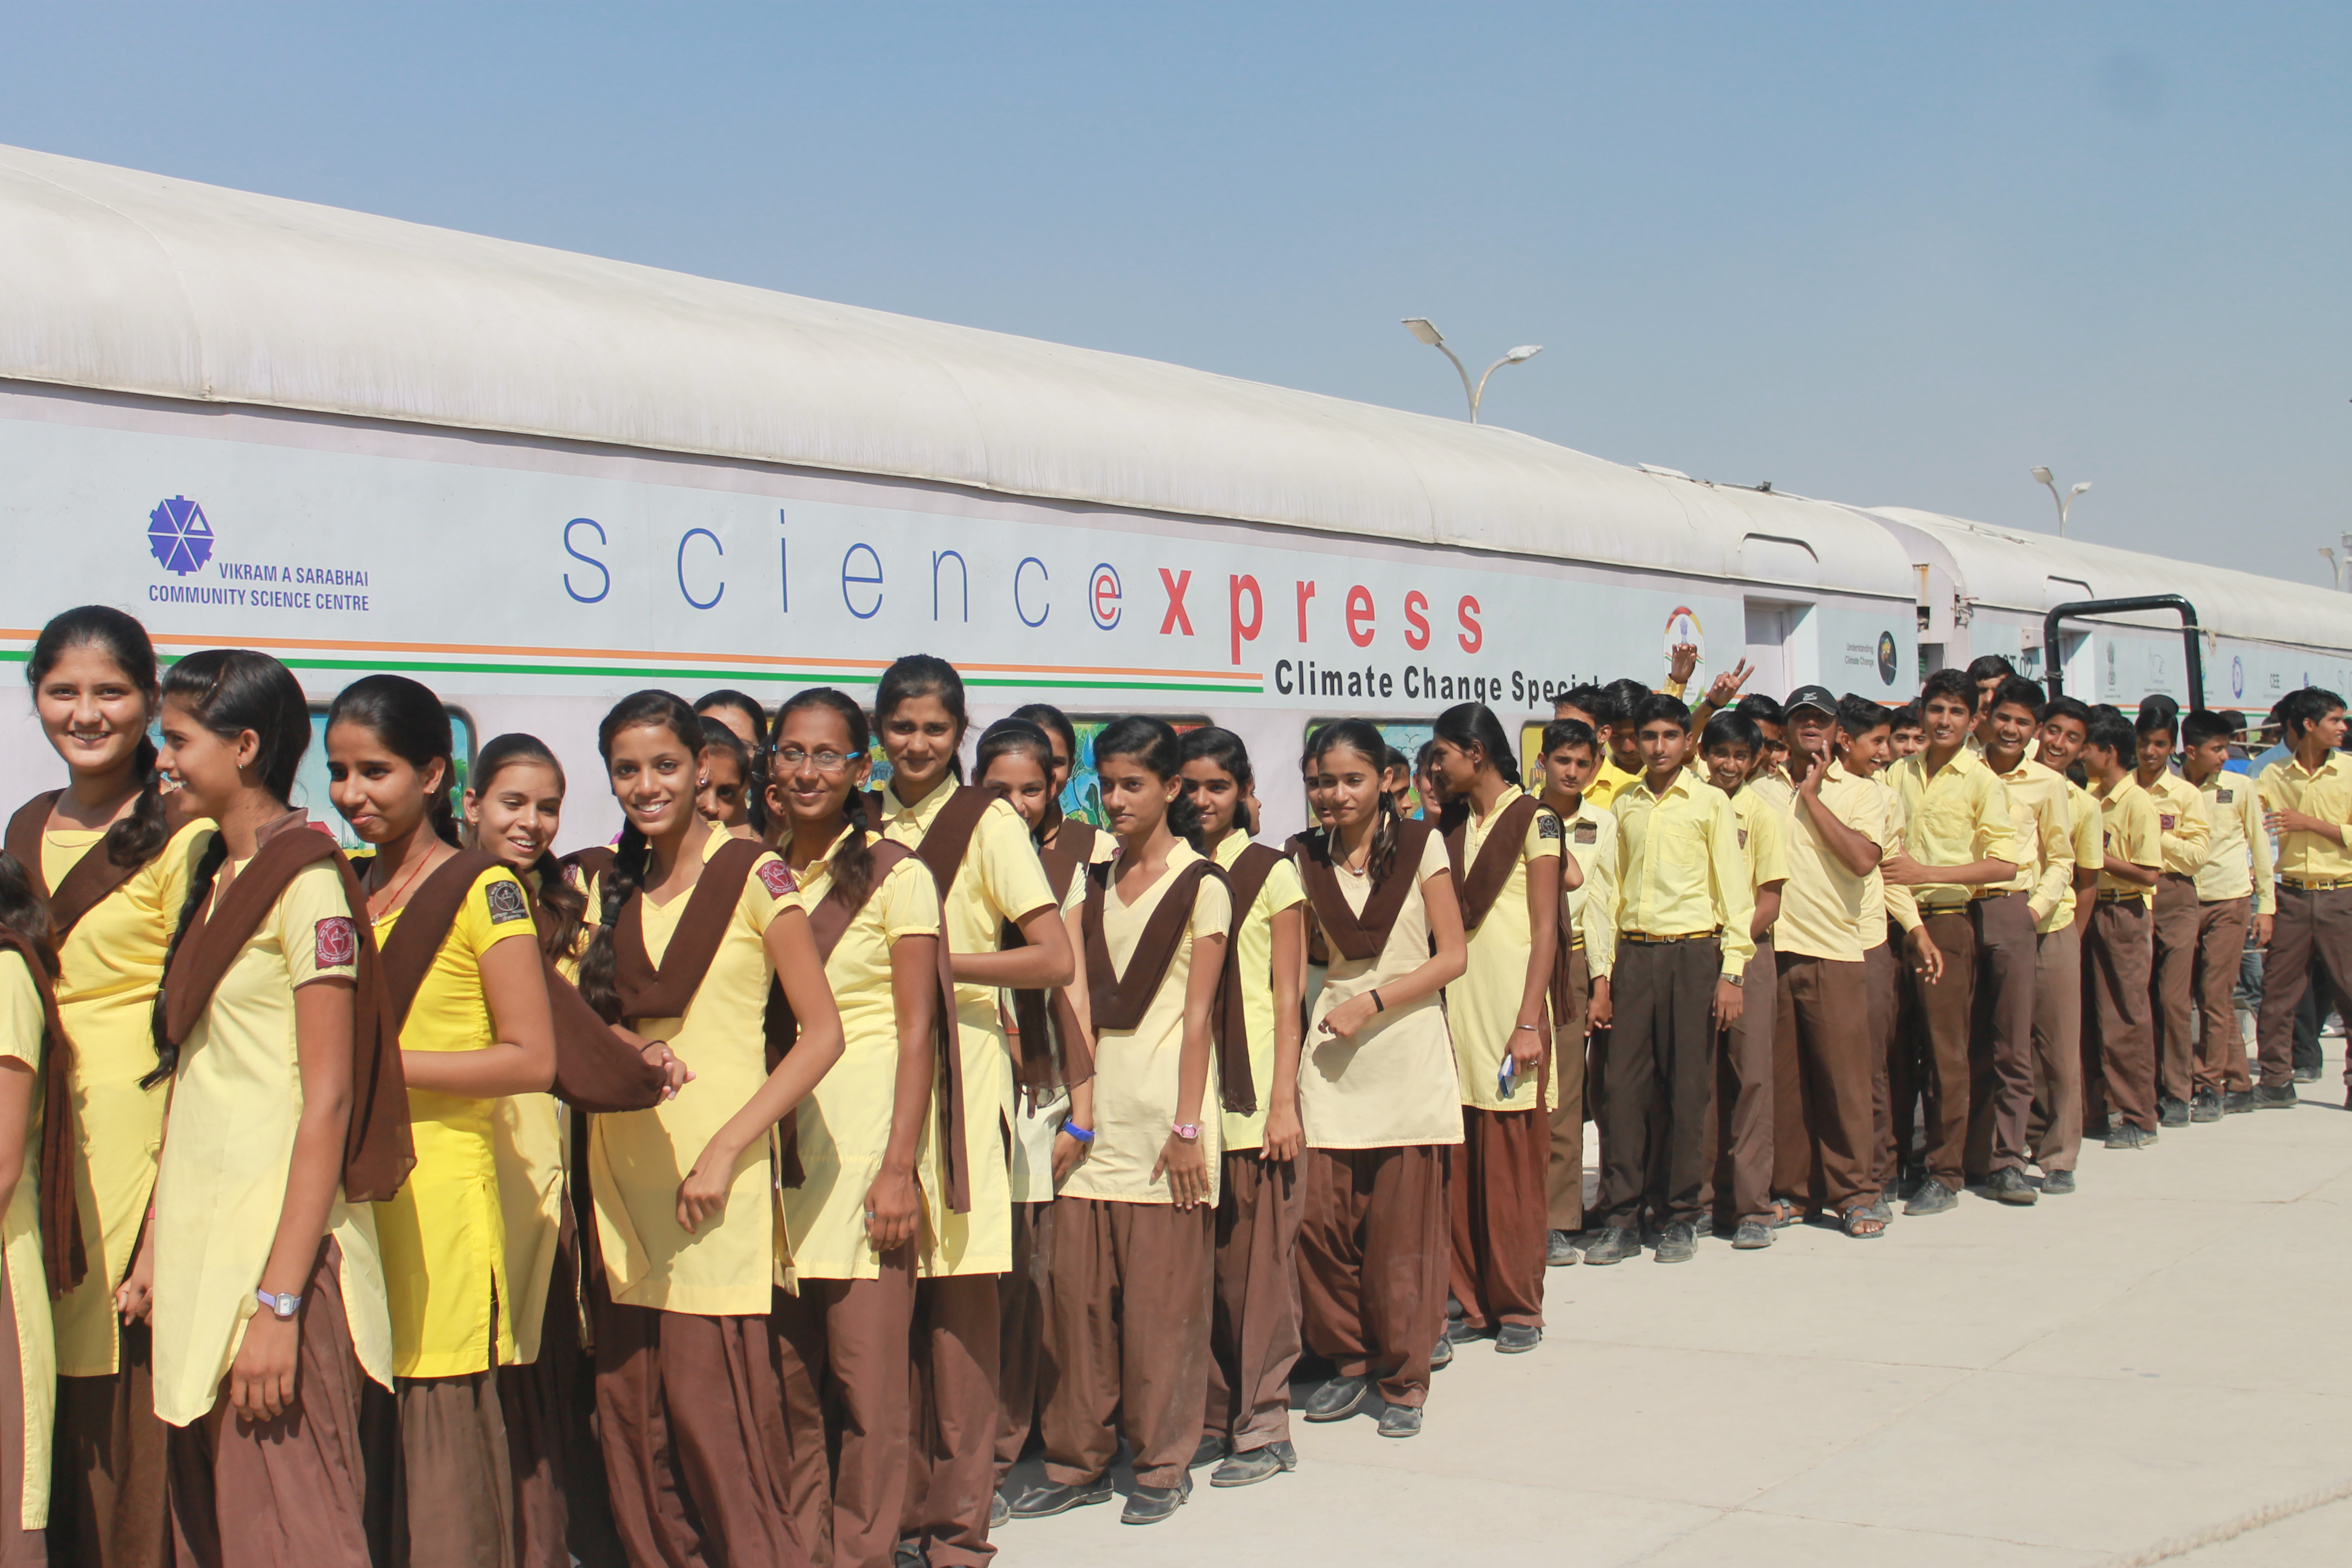 Students in queue on visit to Science Express